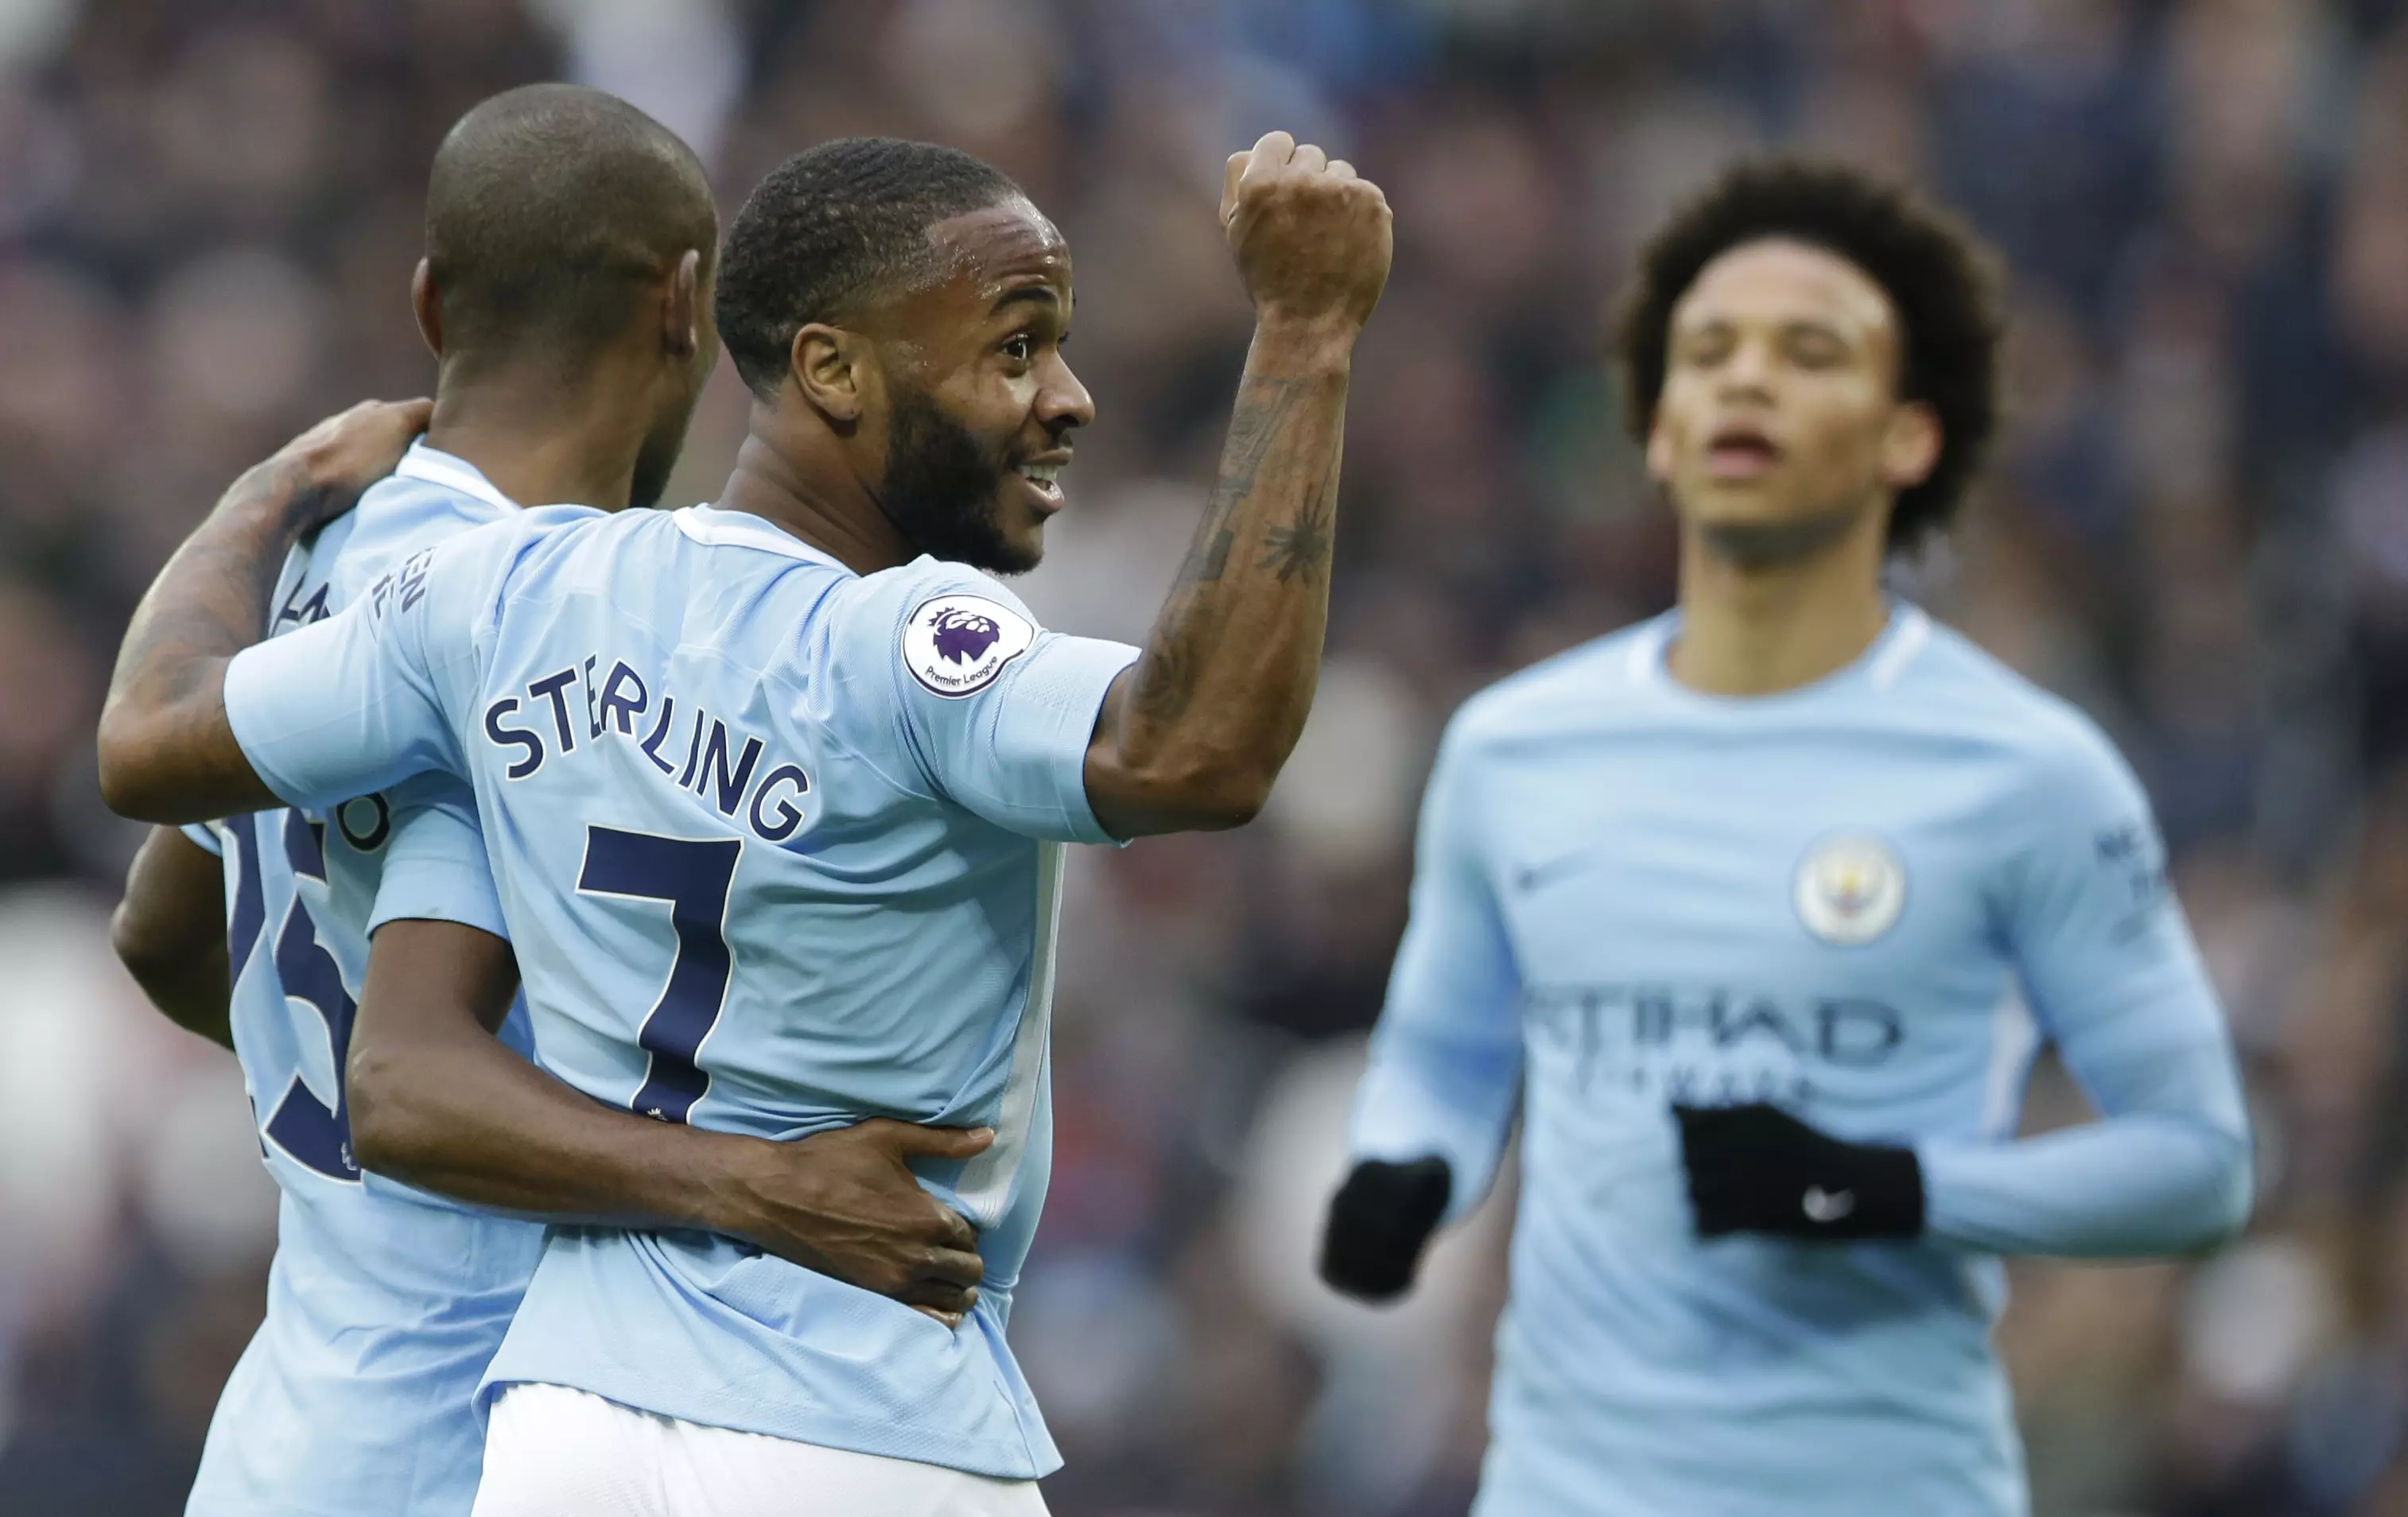 City have been in scintillating form this season. Image: PA Images